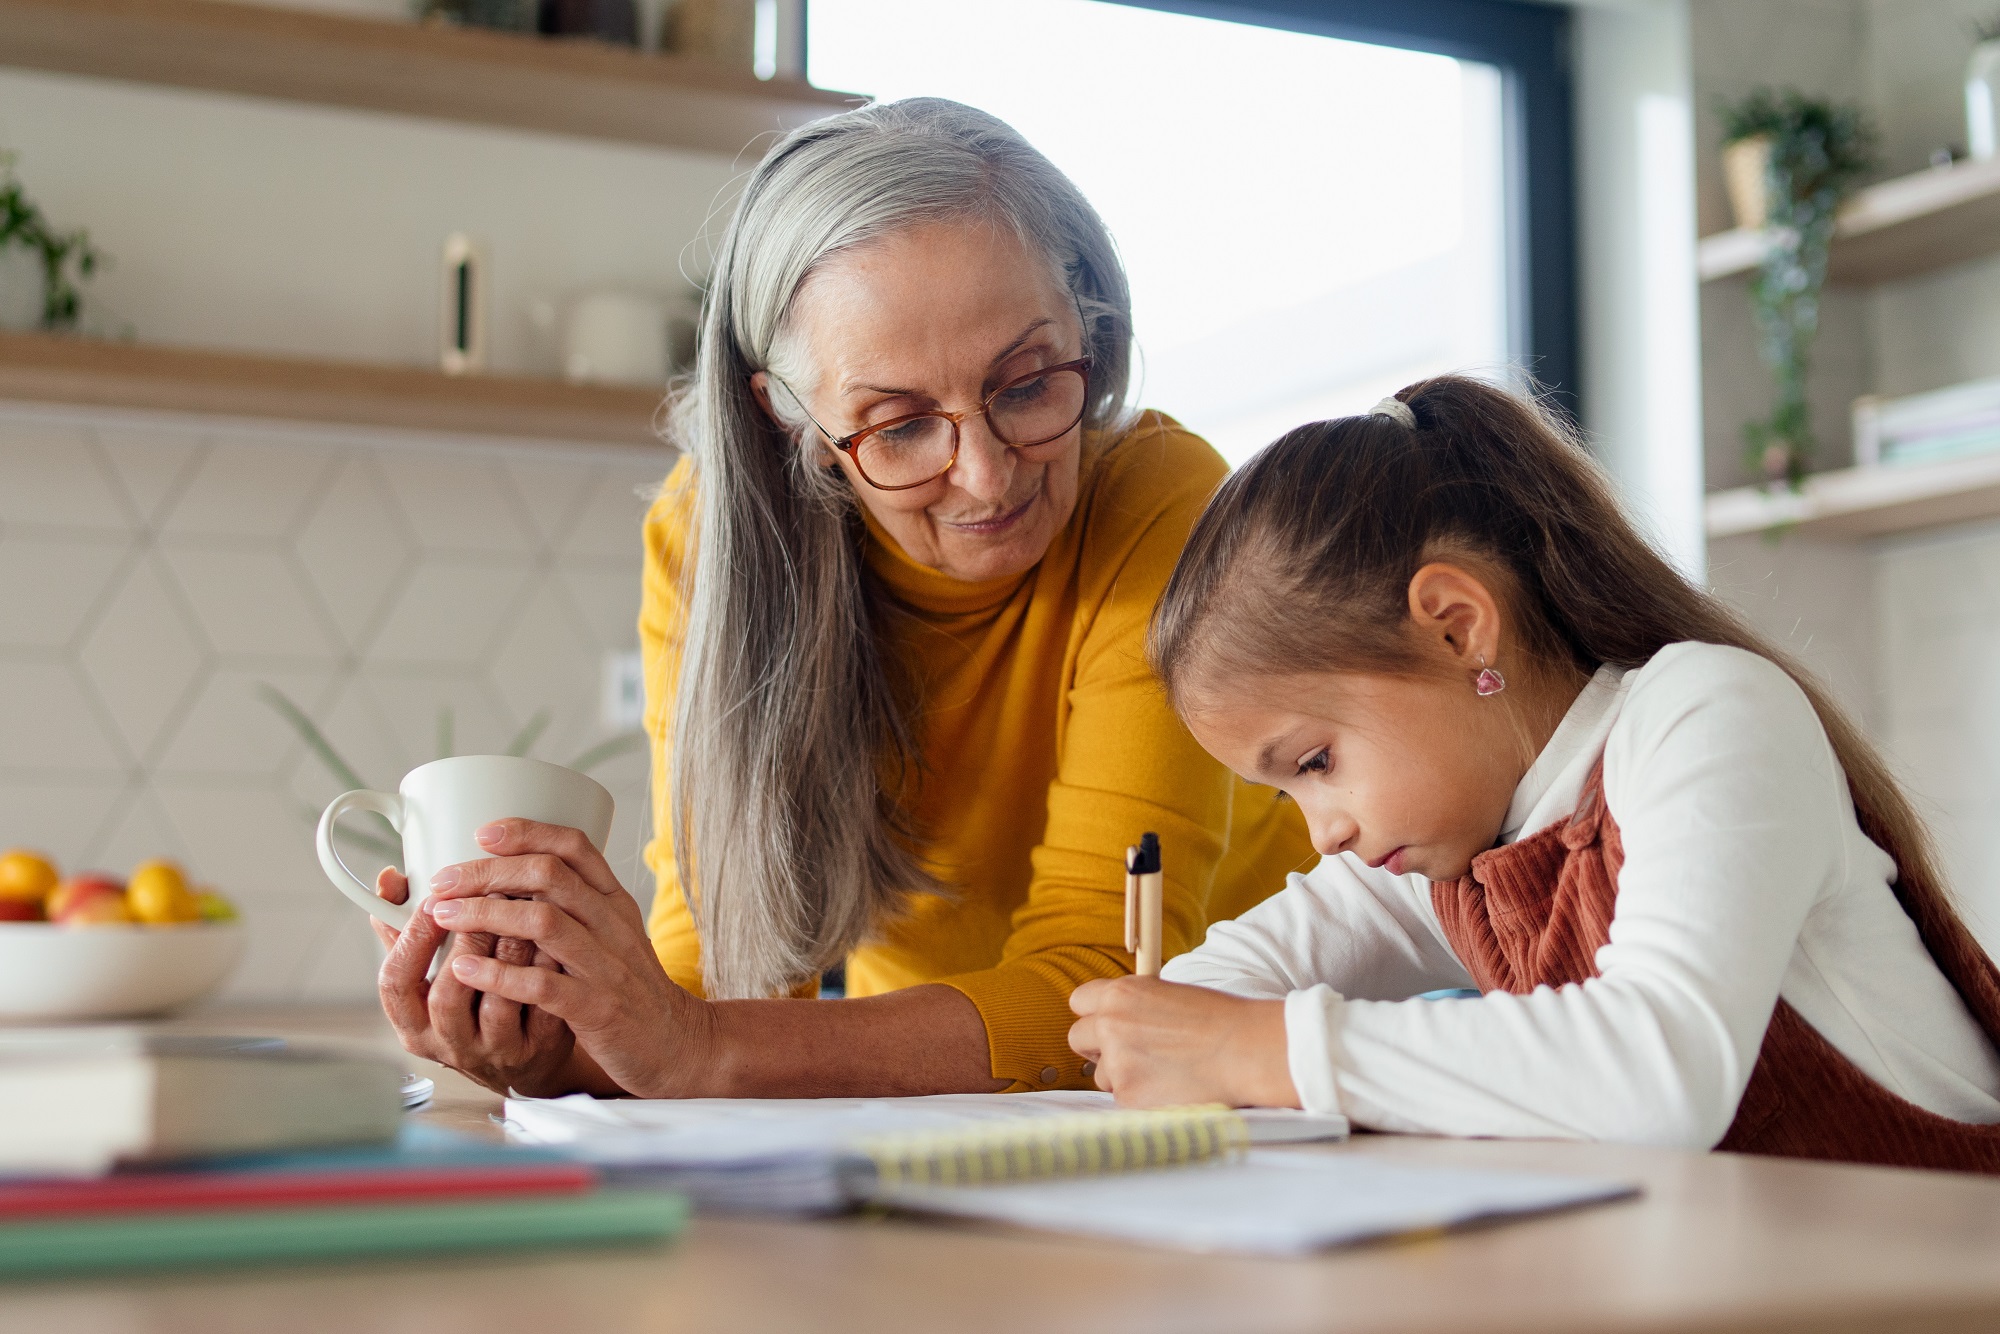 When grandparents raise grandkids: older woman with long hair holding coffee cup helping young girl with homework